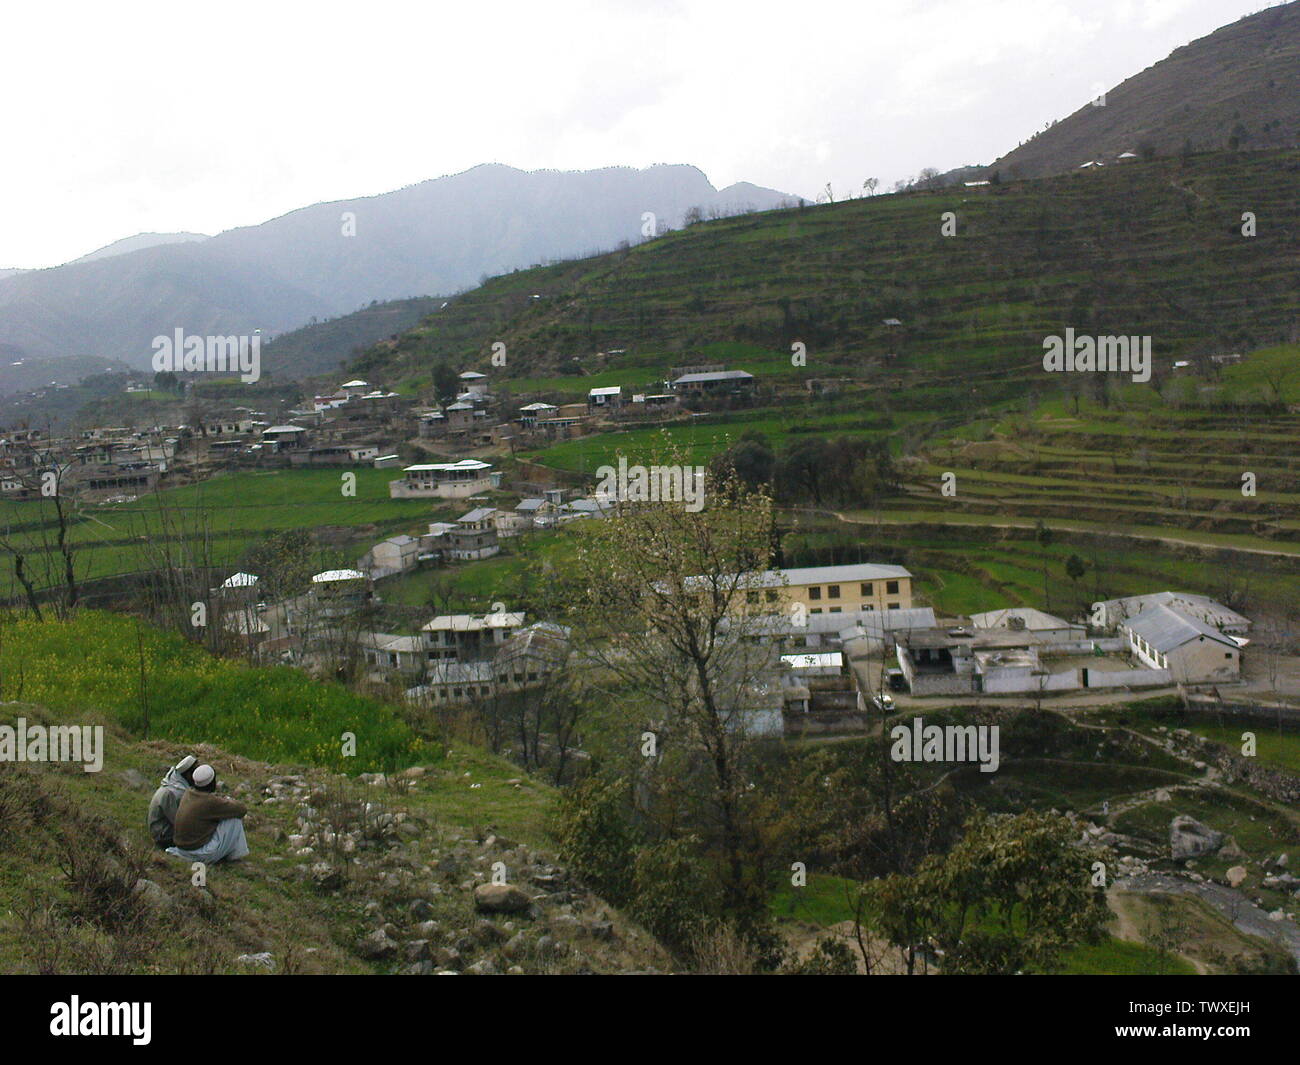 A view of Koozkai Martung, taken from East in early Spring.; 05-03-2009; I (Seraj-ul-Haq) created this work entirely by myself.; Seraj-ul-Haq / Serajulhaque at en.pedia; Stock Photo